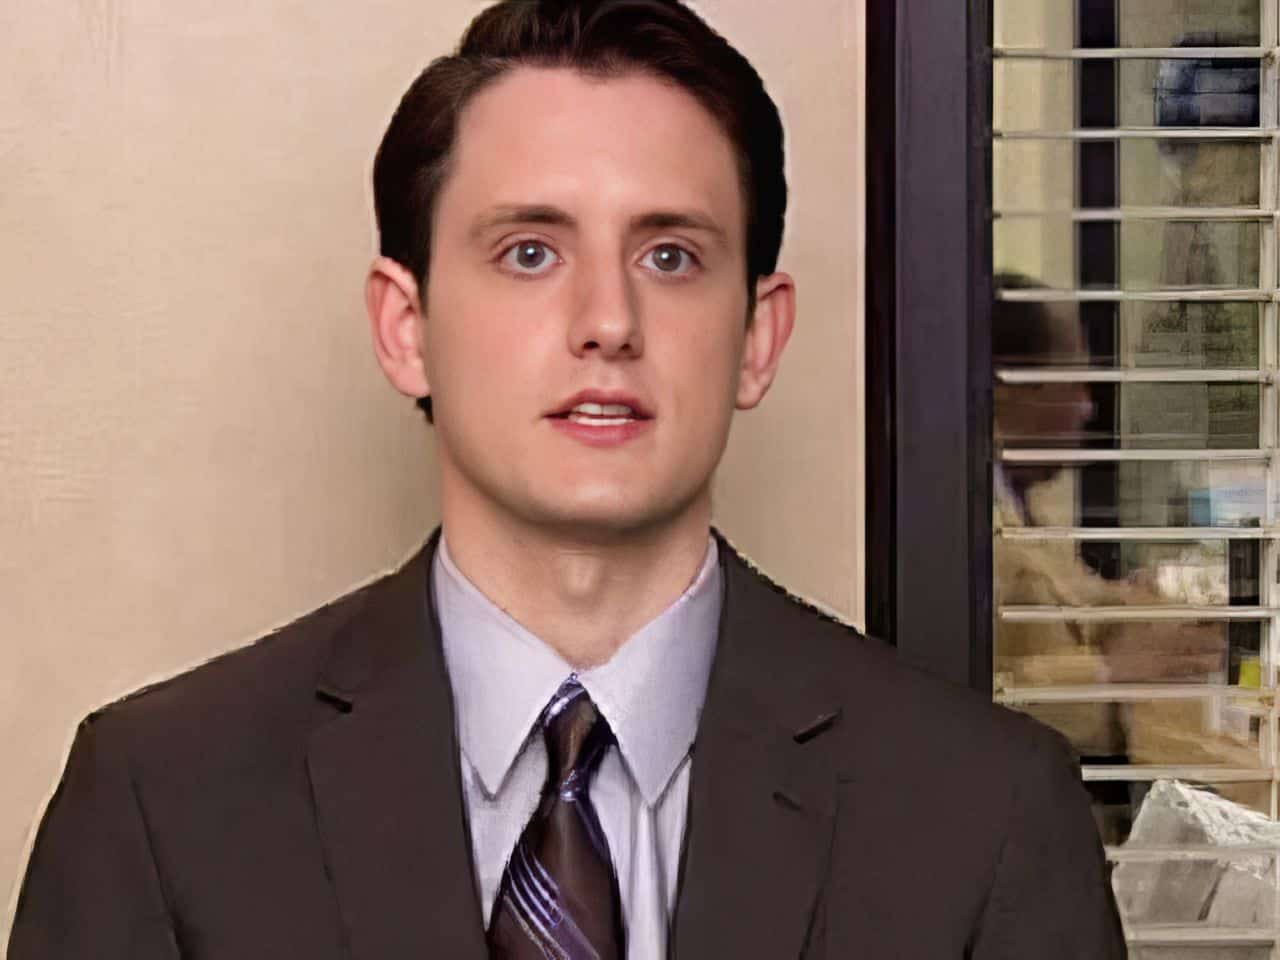 Gabe From The Office The Best Dressed Man in Scranton 2